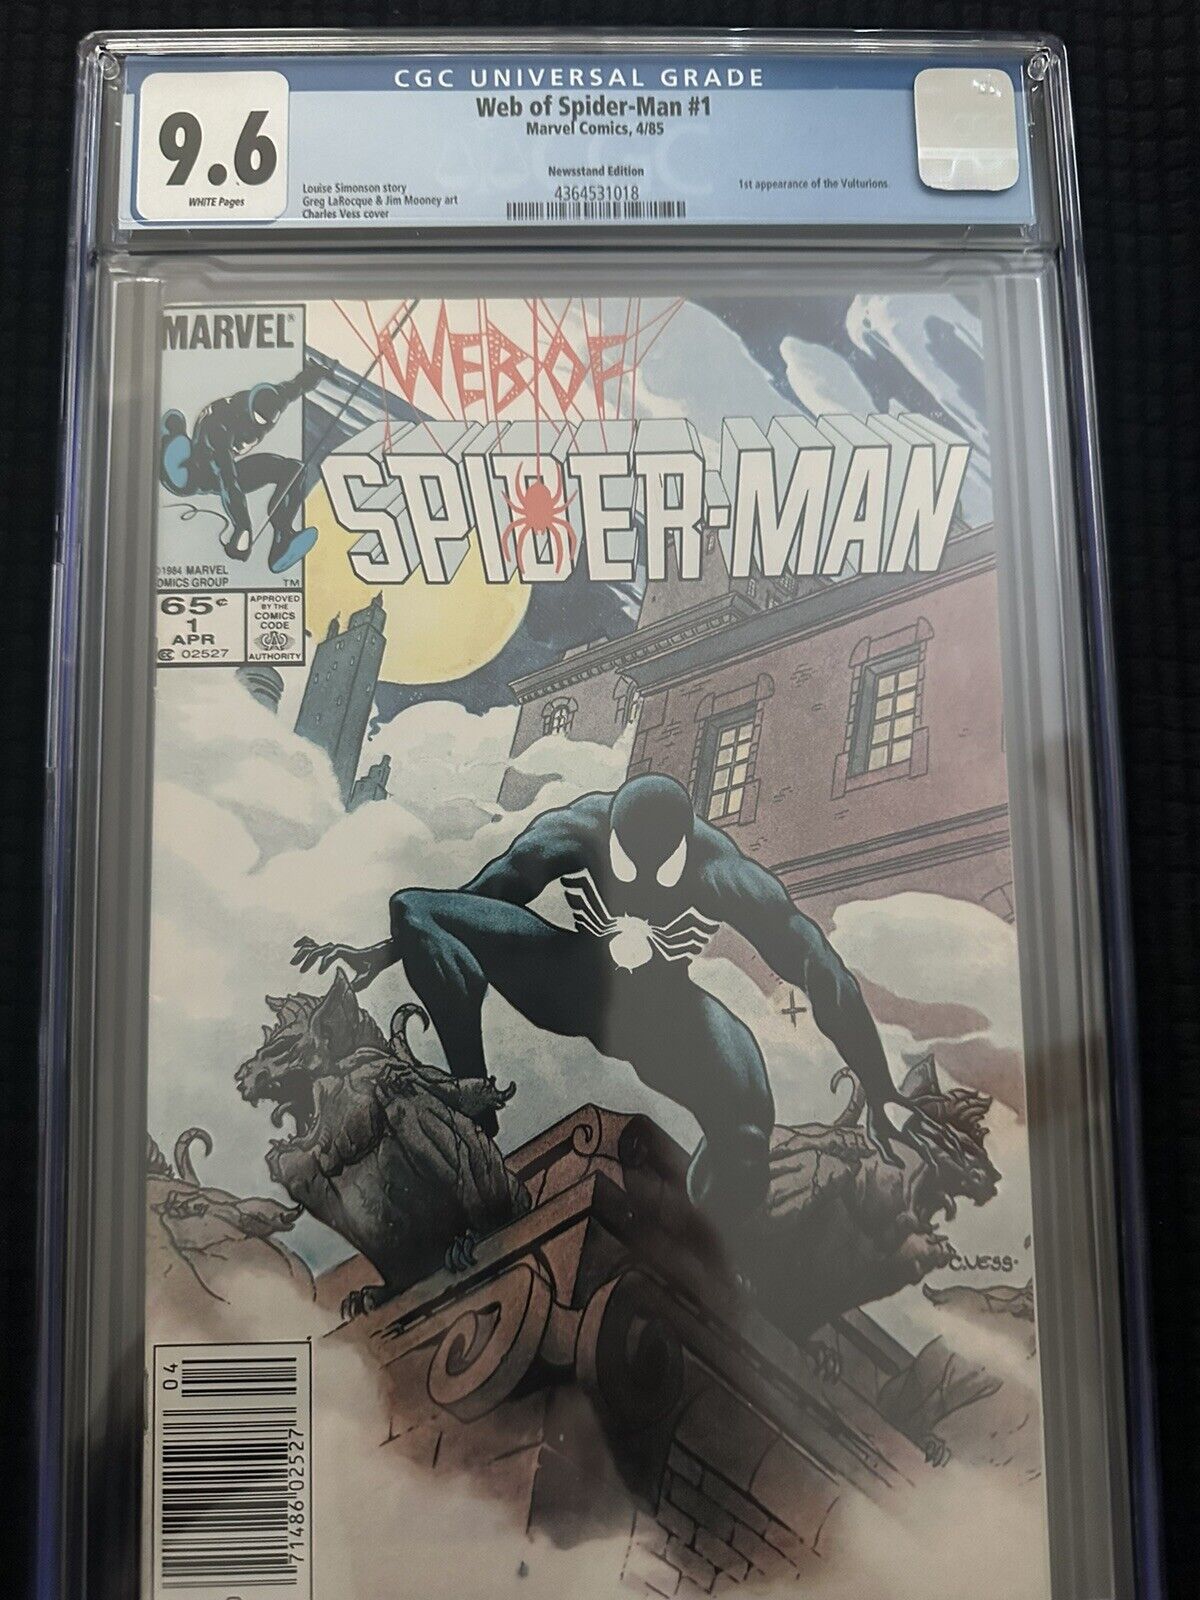 Web of Spider-Man #1 (Marvel 1985) CGC 9.6 White Pages NEWSSTAND